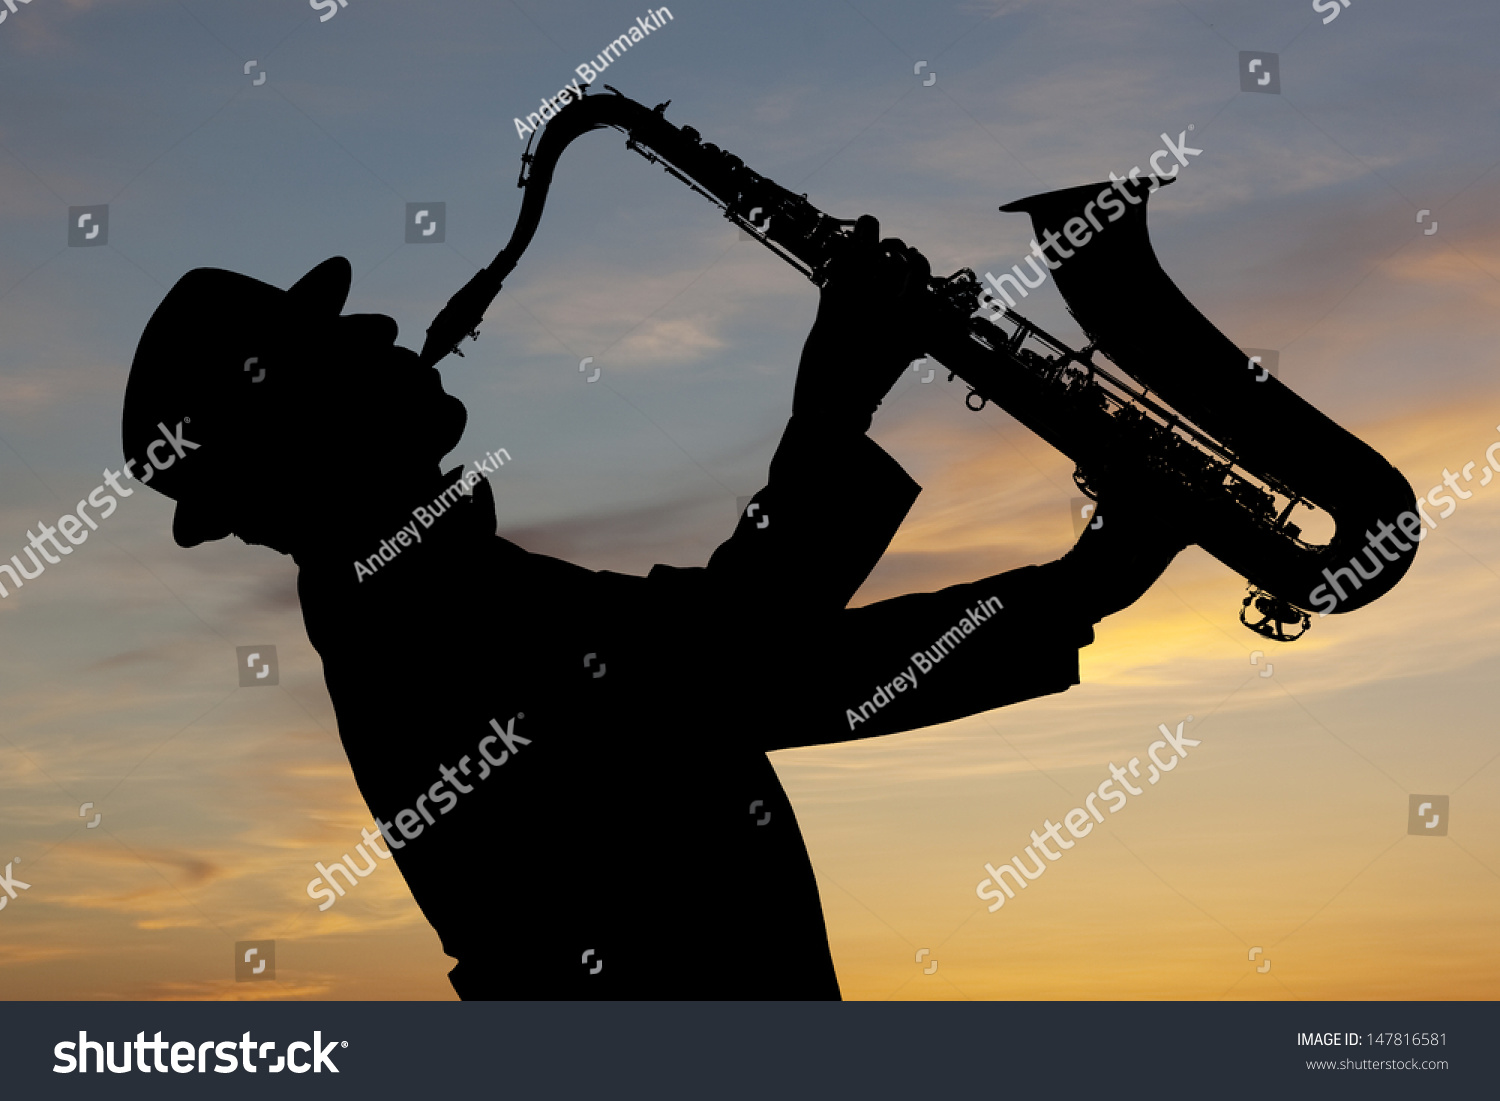 Saxophonist. Man playing on saxophone against the background of sunset #147816581